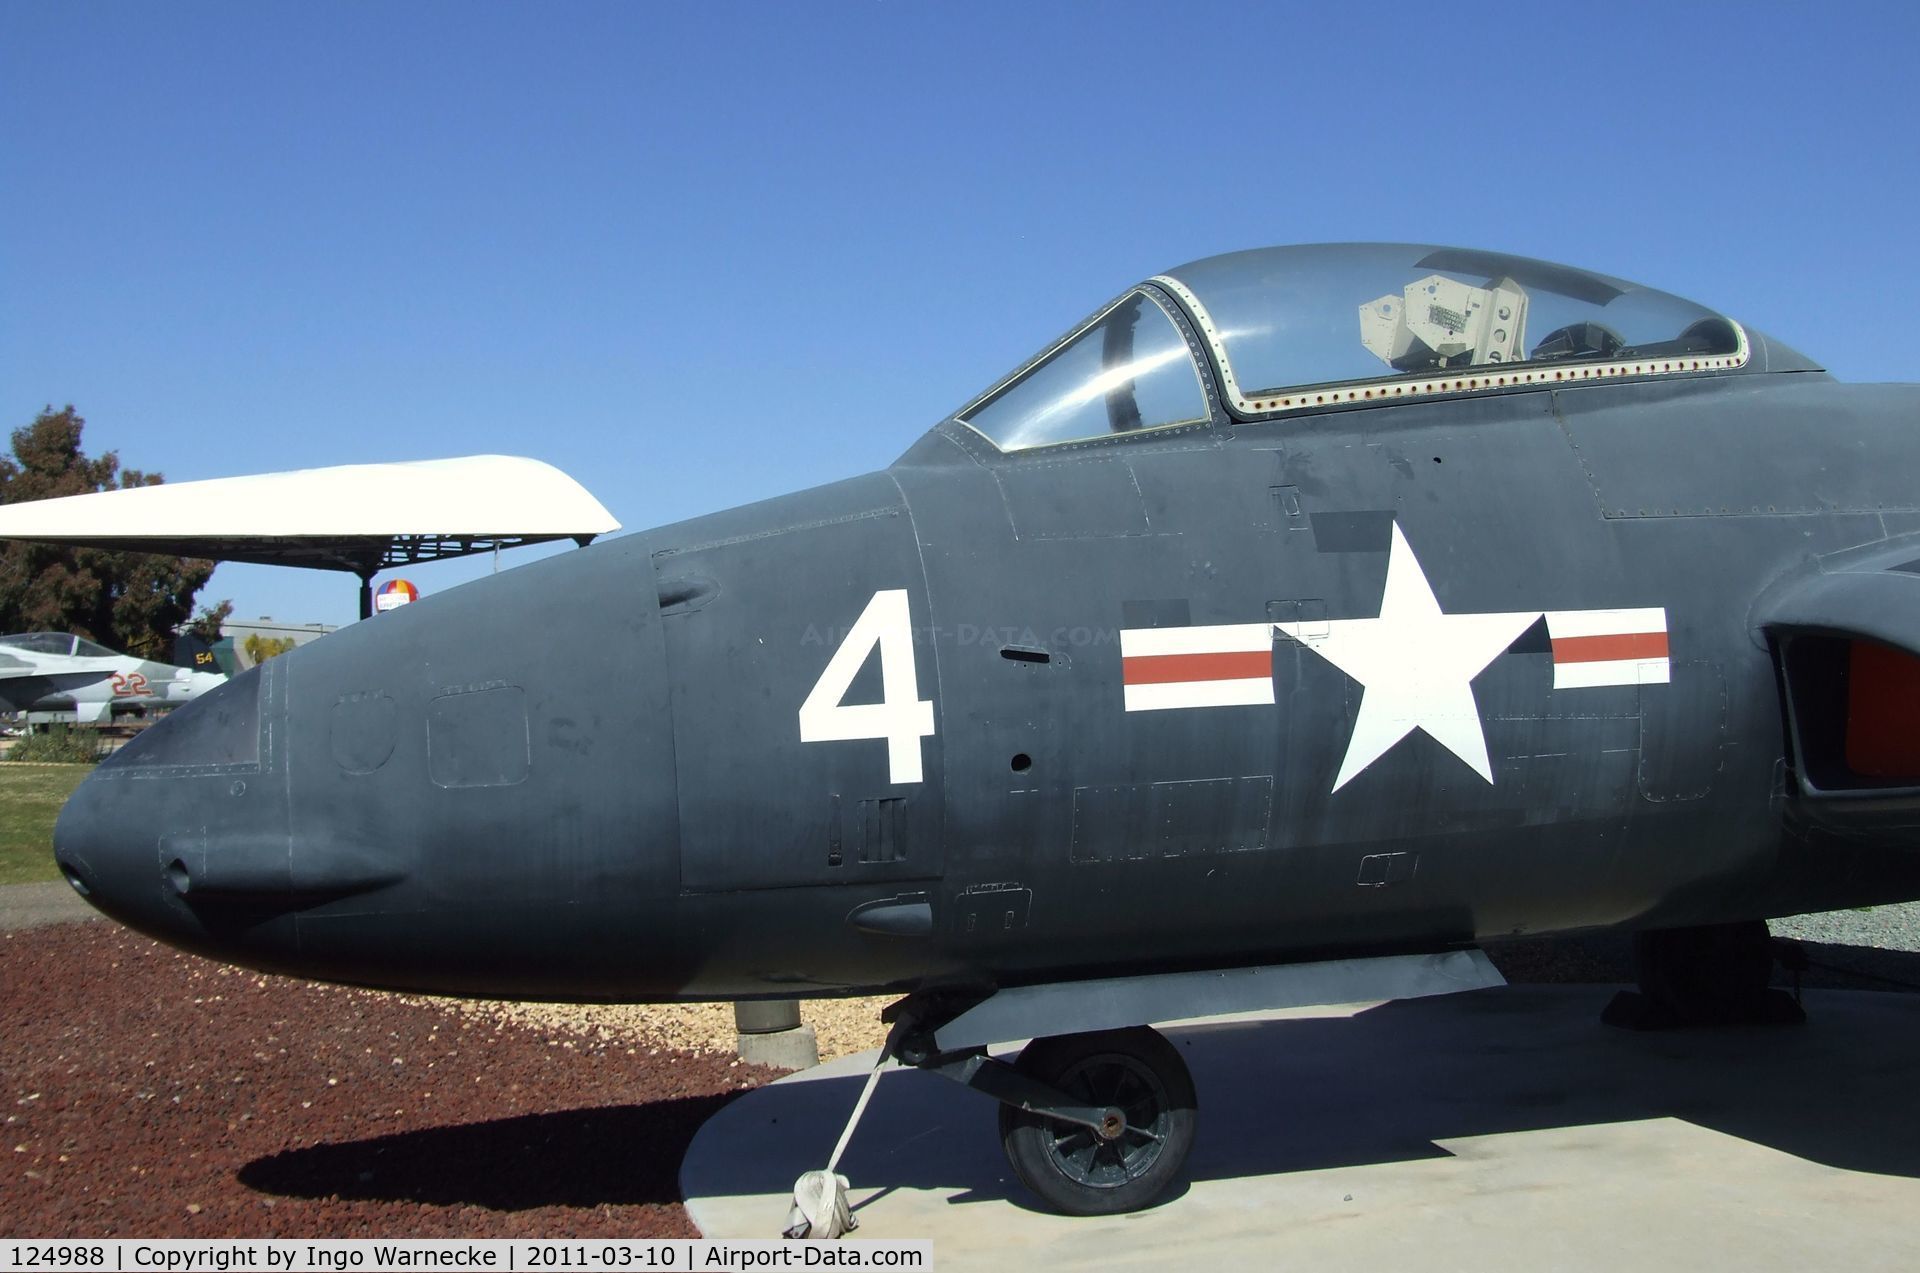 124988, McDonnell F2H-2 Banshee C/N 291, McDonnell F2H-2 Banshee at the Flying Leatherneck Aviation Museum, Miramar CA